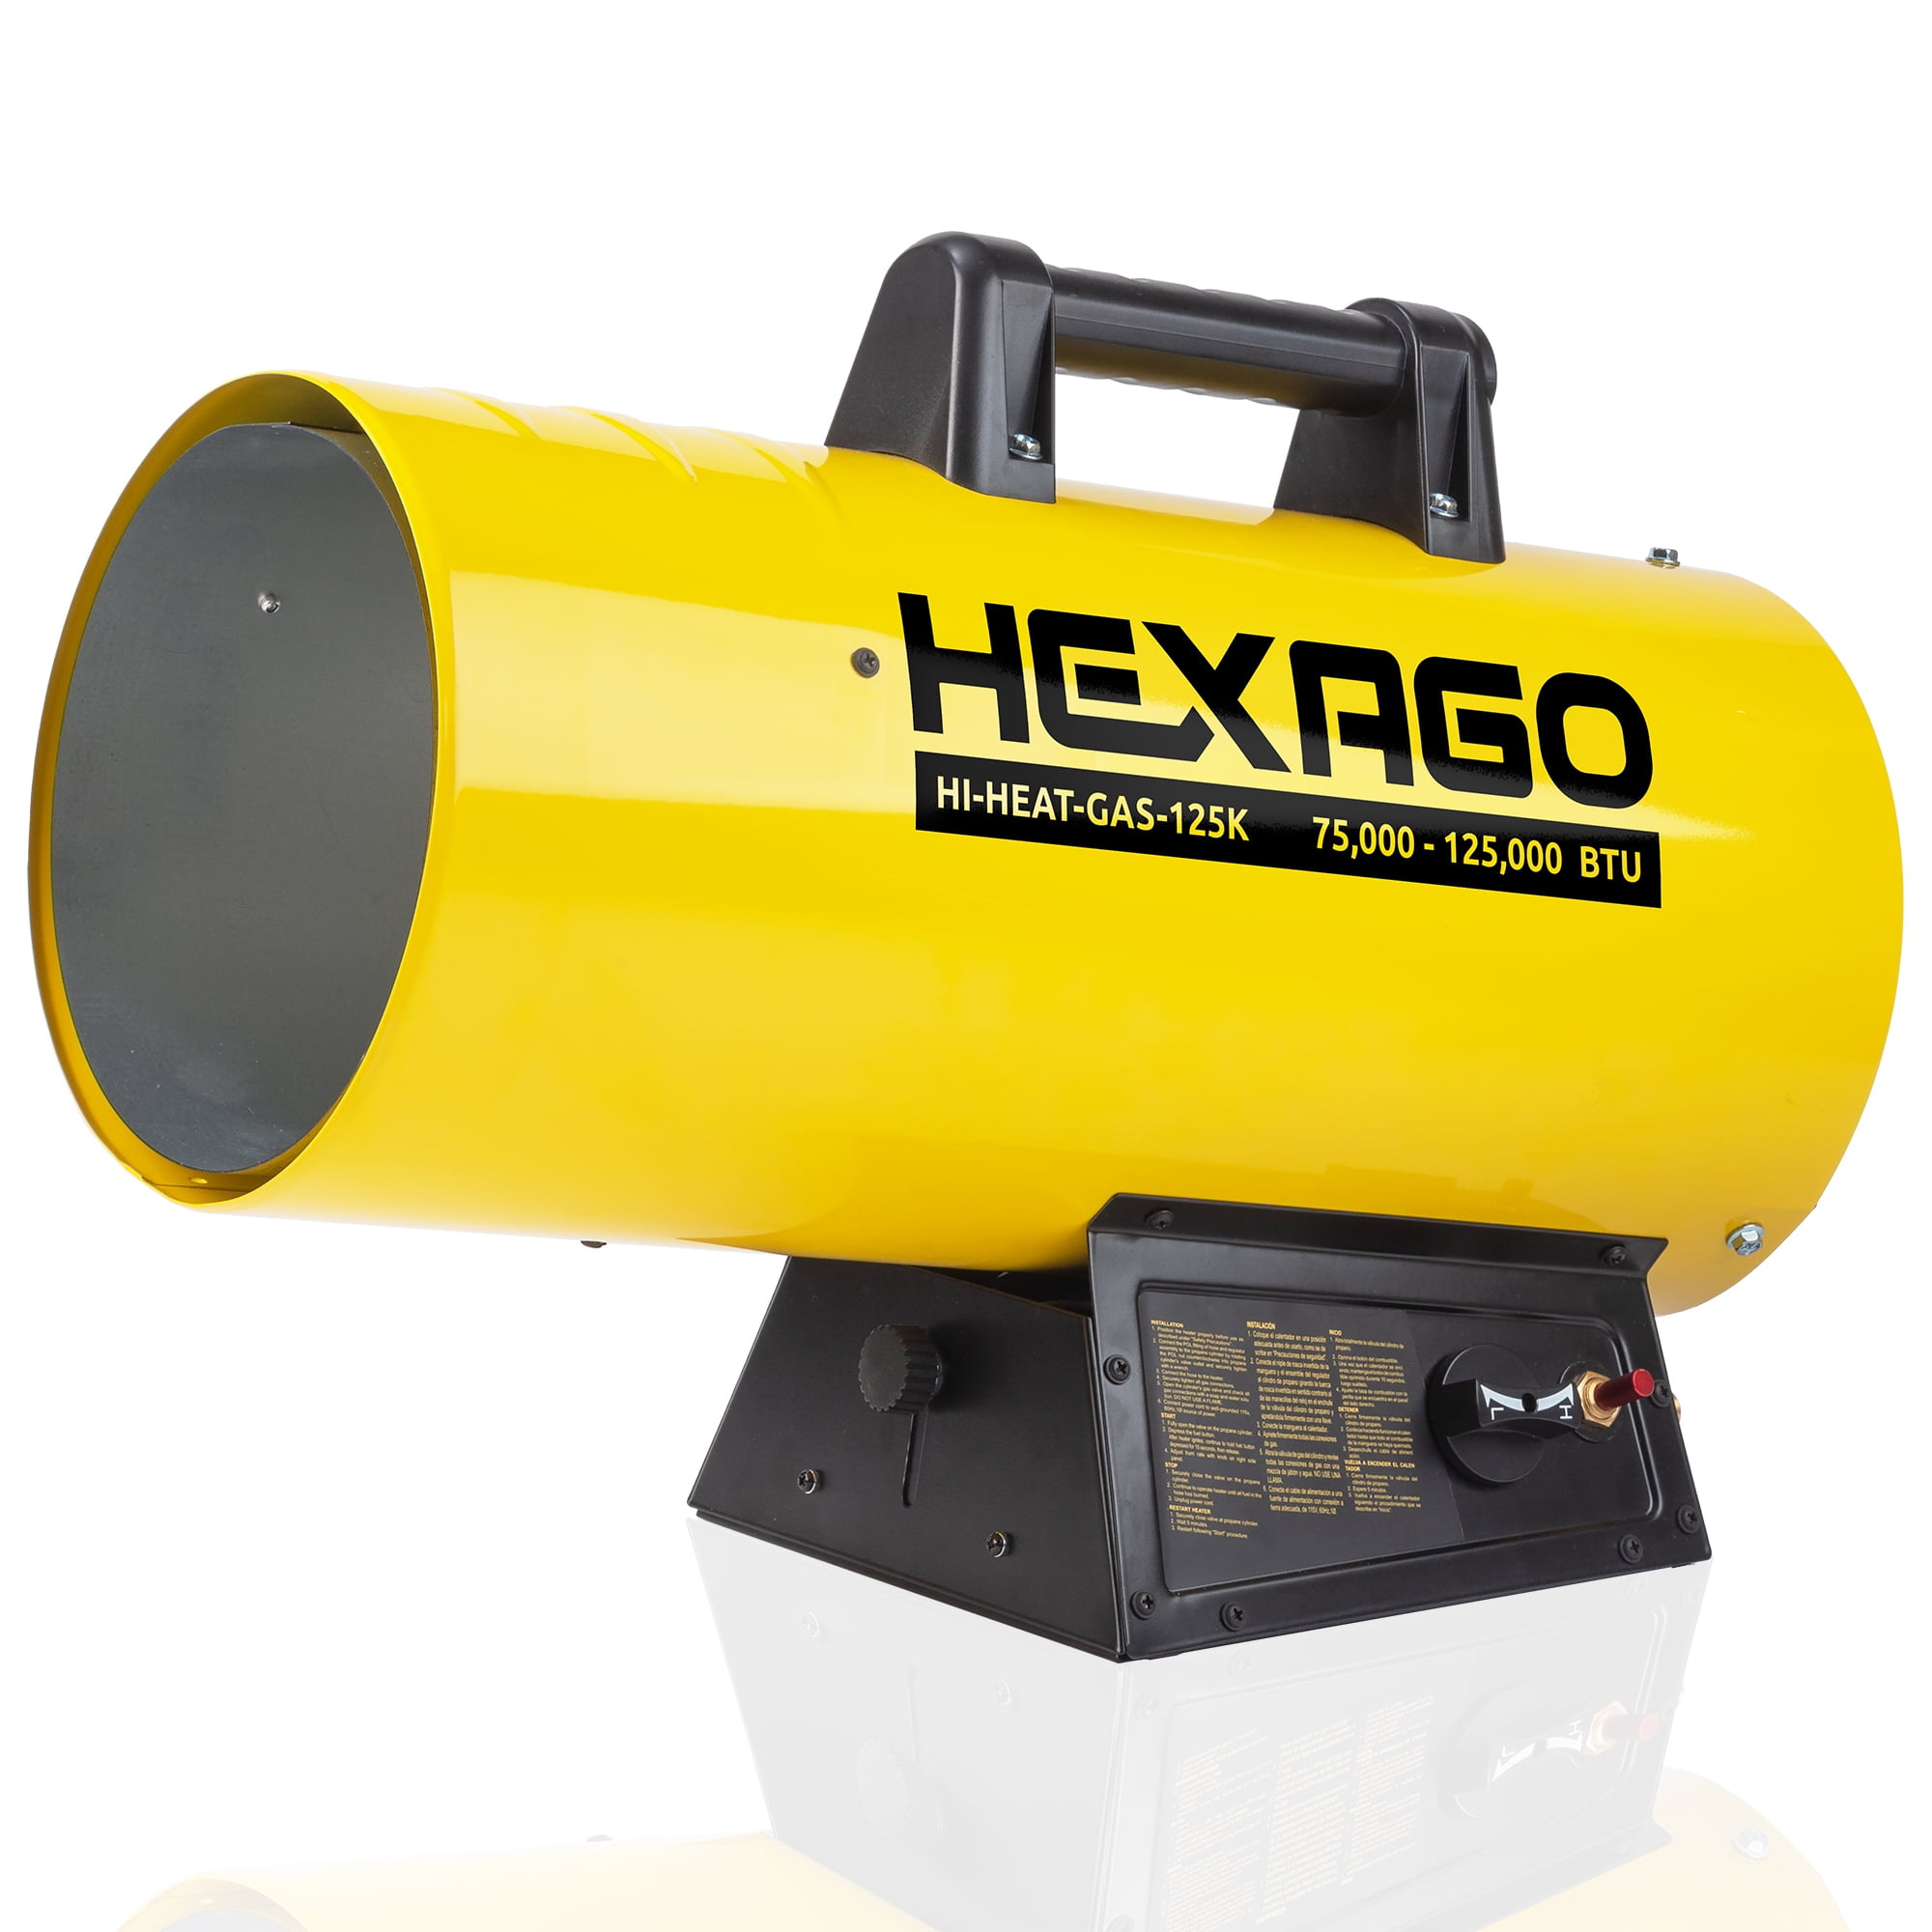 HEXAGO 125,000 BTU Adjustable Portable Liquid Propane Gas Forced Air Heater, Height Adjustable, CSA Listed, Yellow, Heating up to 3,125 sqft